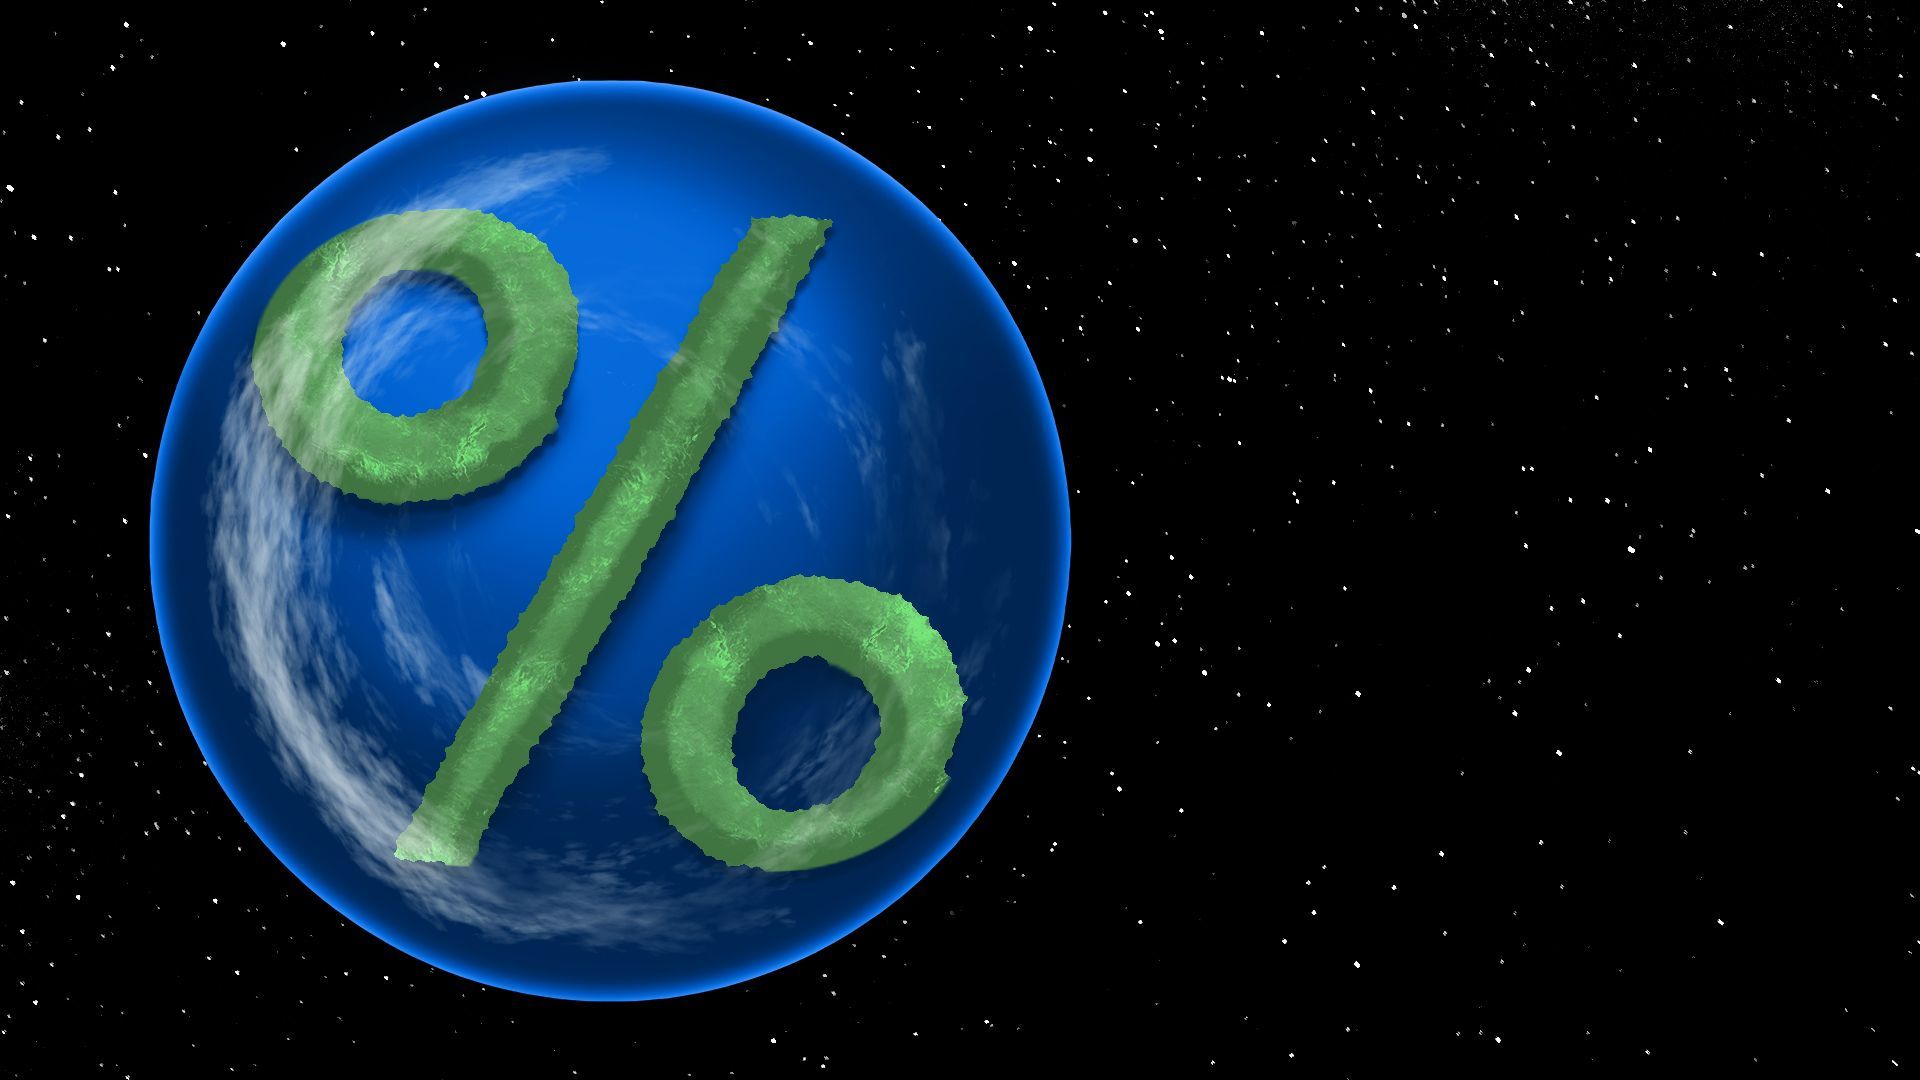 Illustration of the earth with the land in the shape of a percent sign.